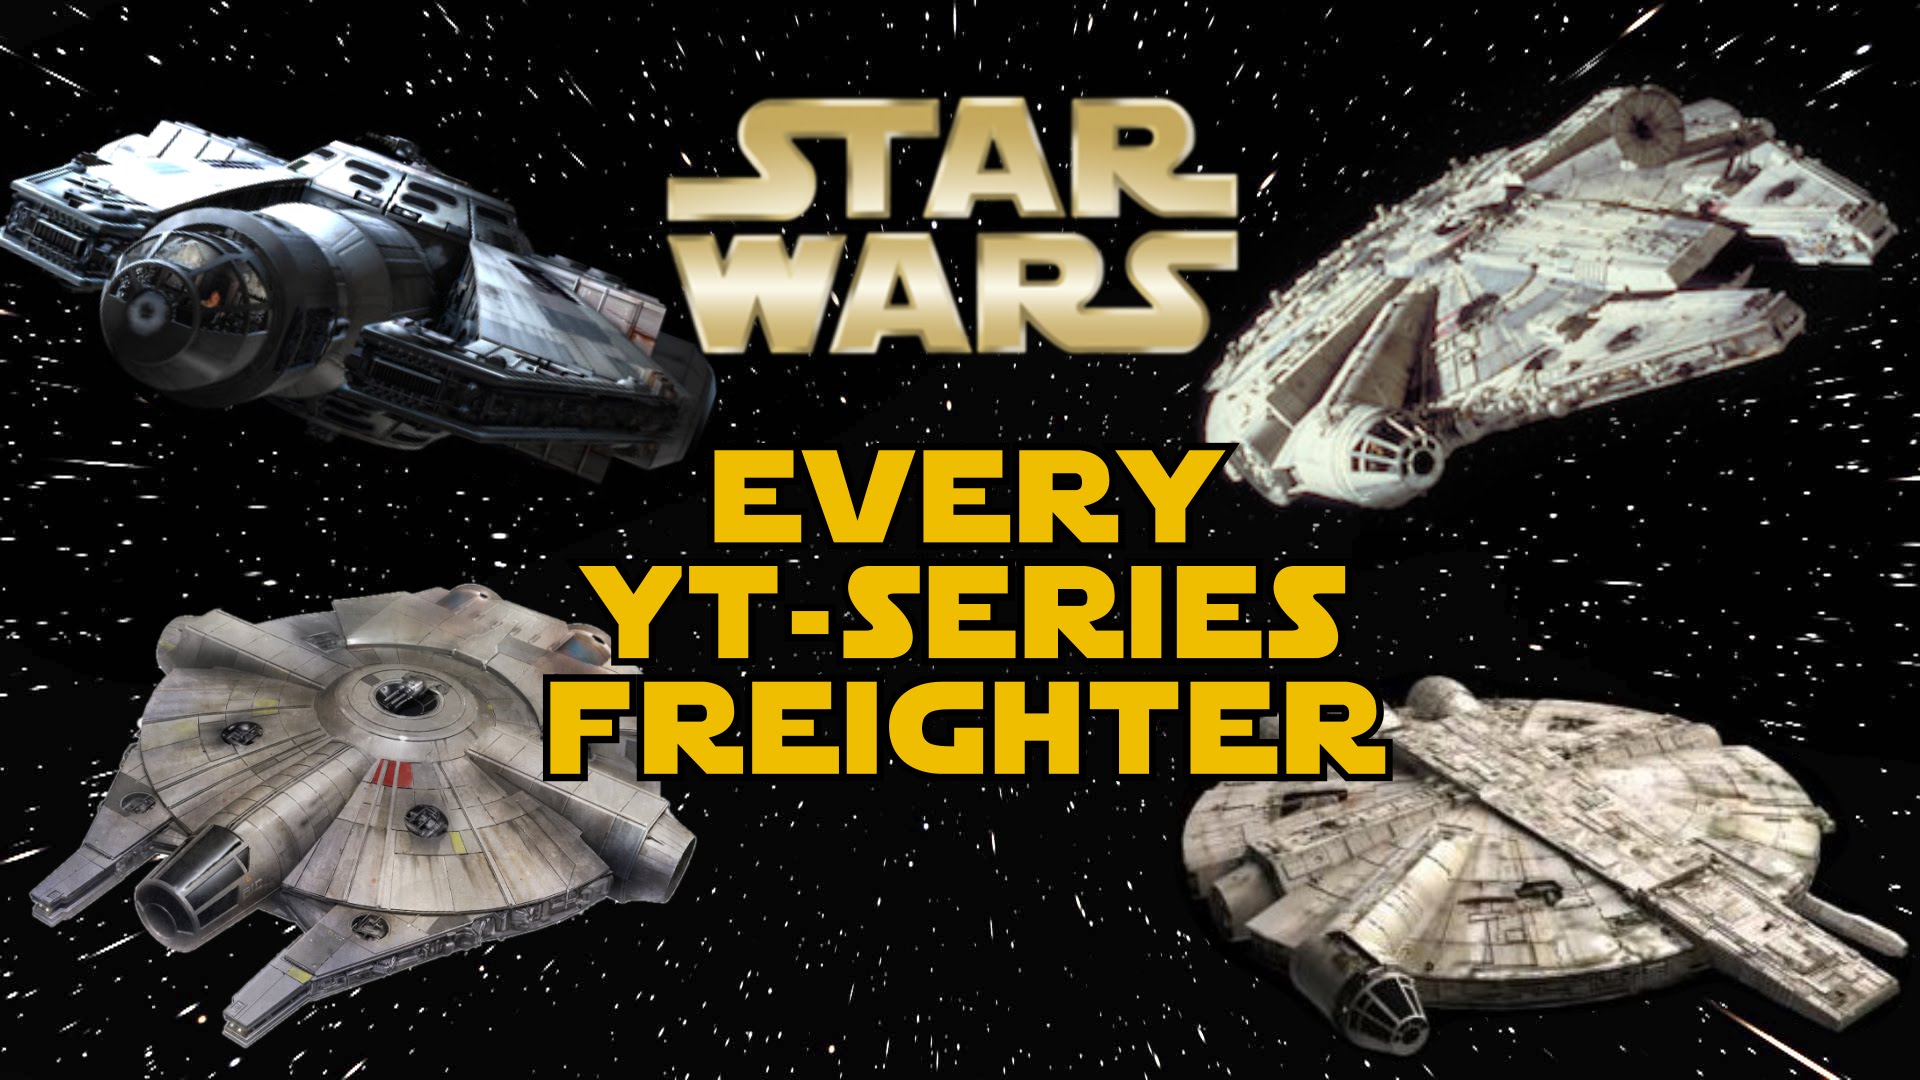 Every Corellian YT-Series Freighter - Star Wars Explained 1